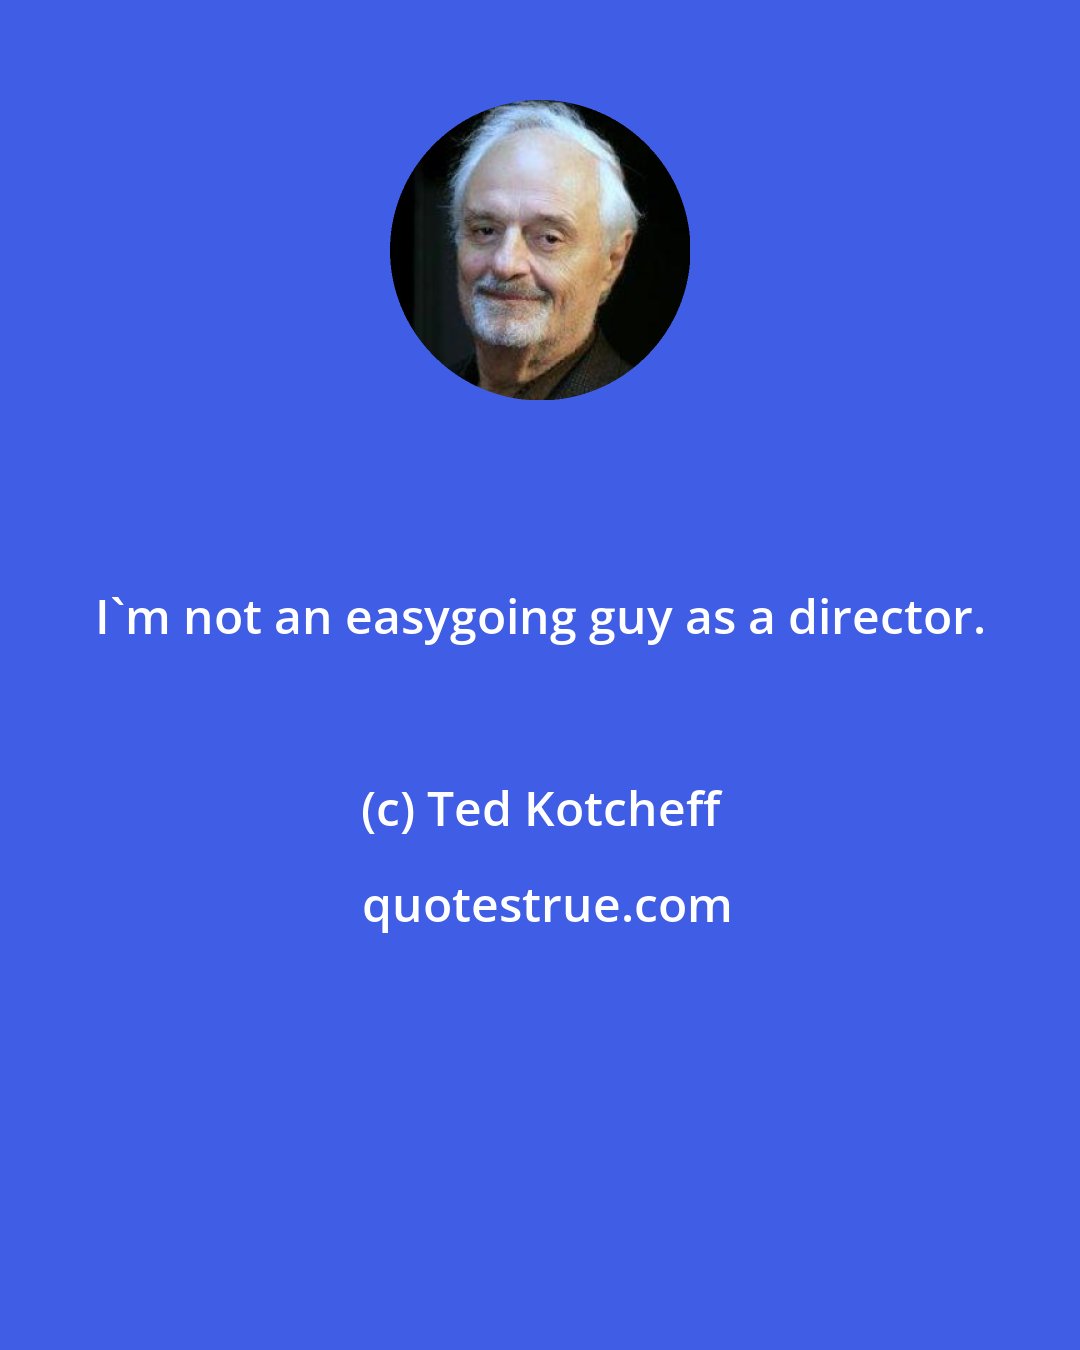 Ted Kotcheff: I'm not an easygoing guy as a director.